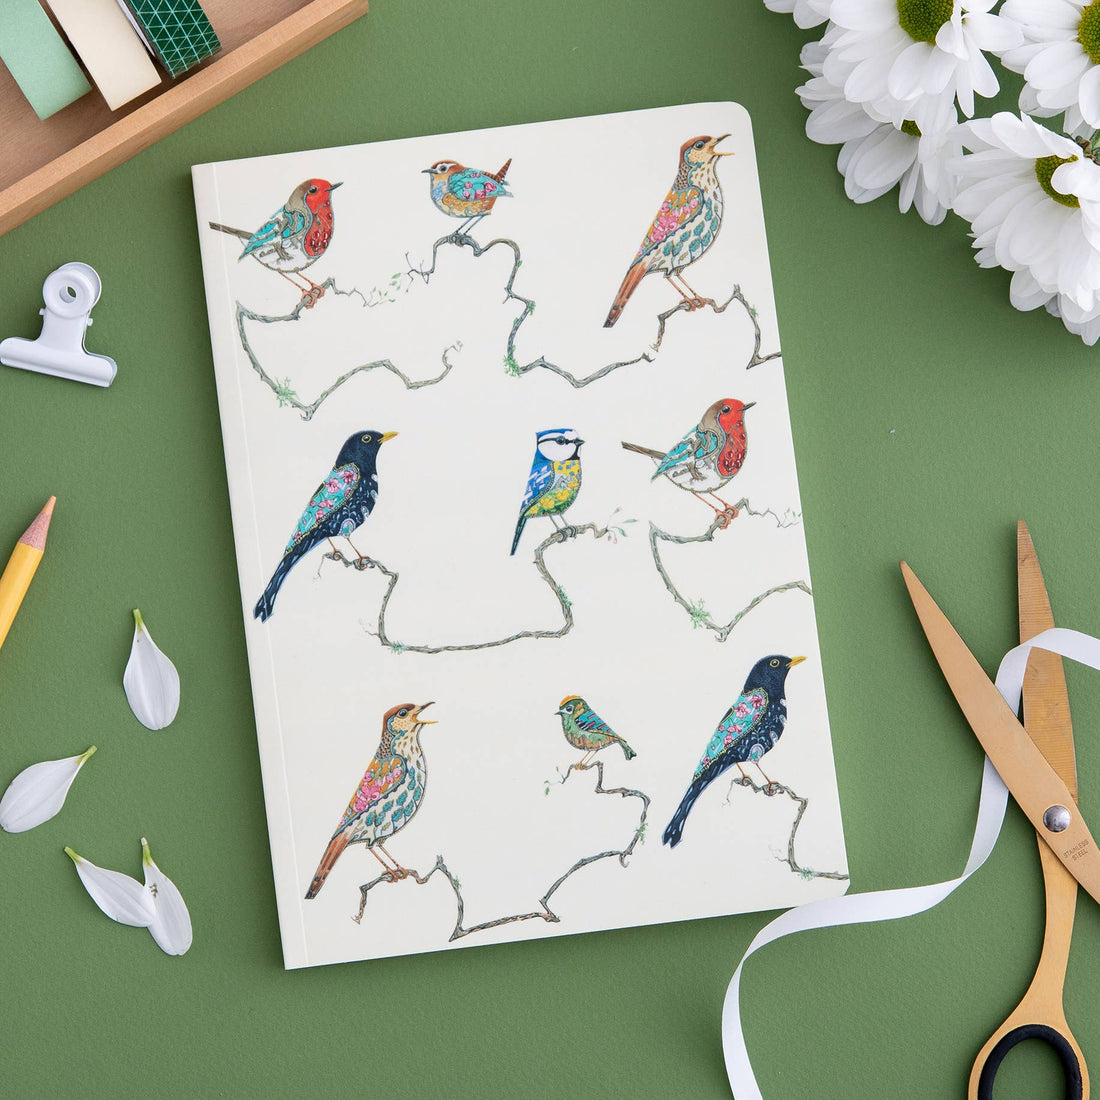 A Songbird Perfect Bound Notebook with a bird illustration on the cover surrounded by art supplies and white flowers on a green background, crafted by British papermakers on luxury cream stock, created by The DM Collection.